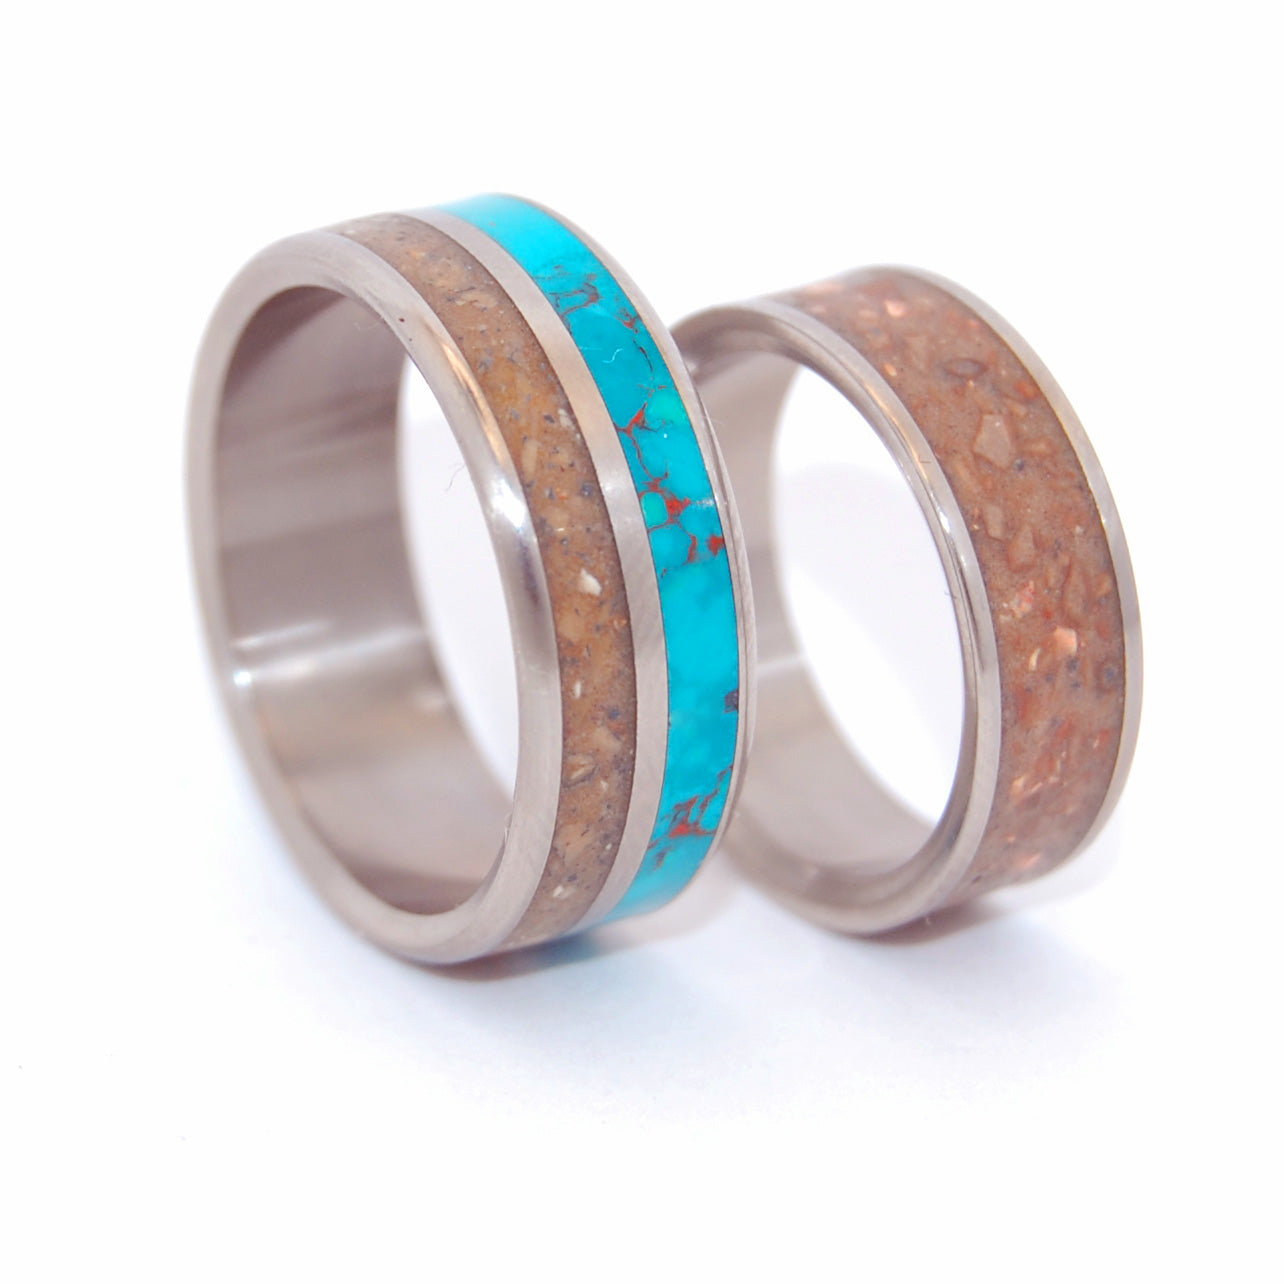 CITY OF DAVID | Ground Stones of Jerusalem - Unique Wedding Rings - Minter and Richter Designs